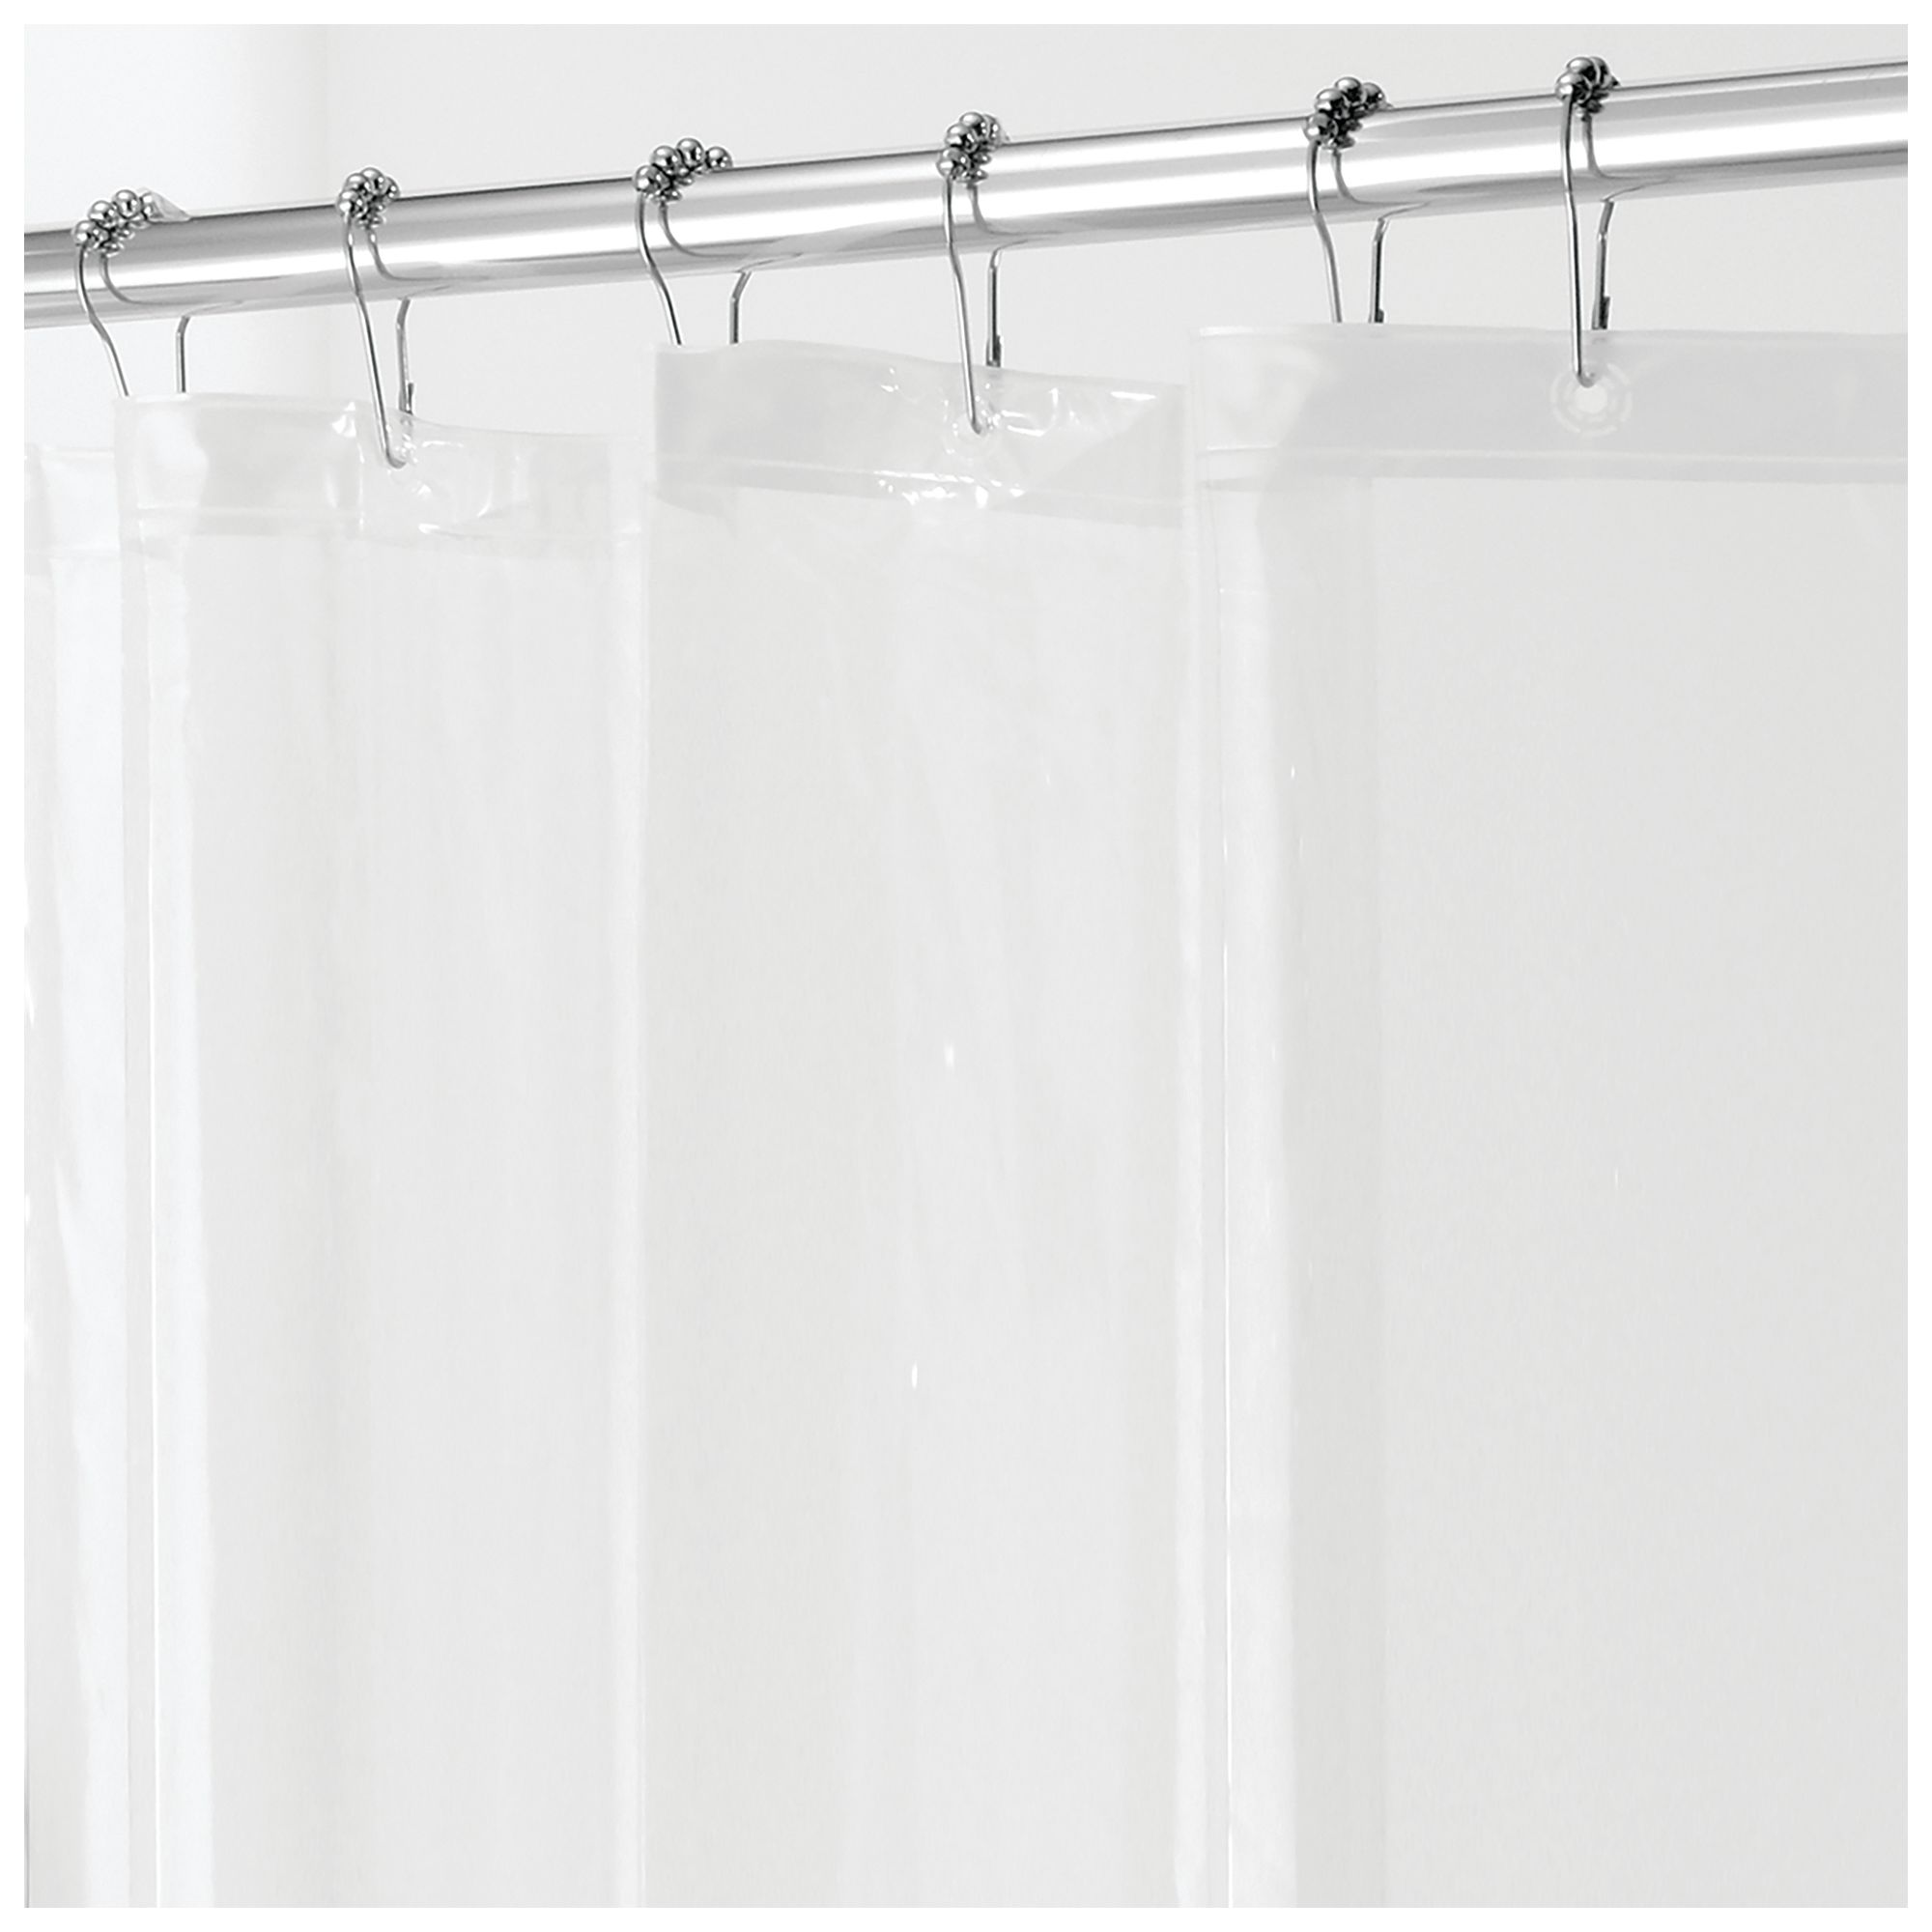 iDesign Clear PVC-Free Mildew Resistant Stall Shower Curtain Liner, 54" x 78" - image 4 of 8